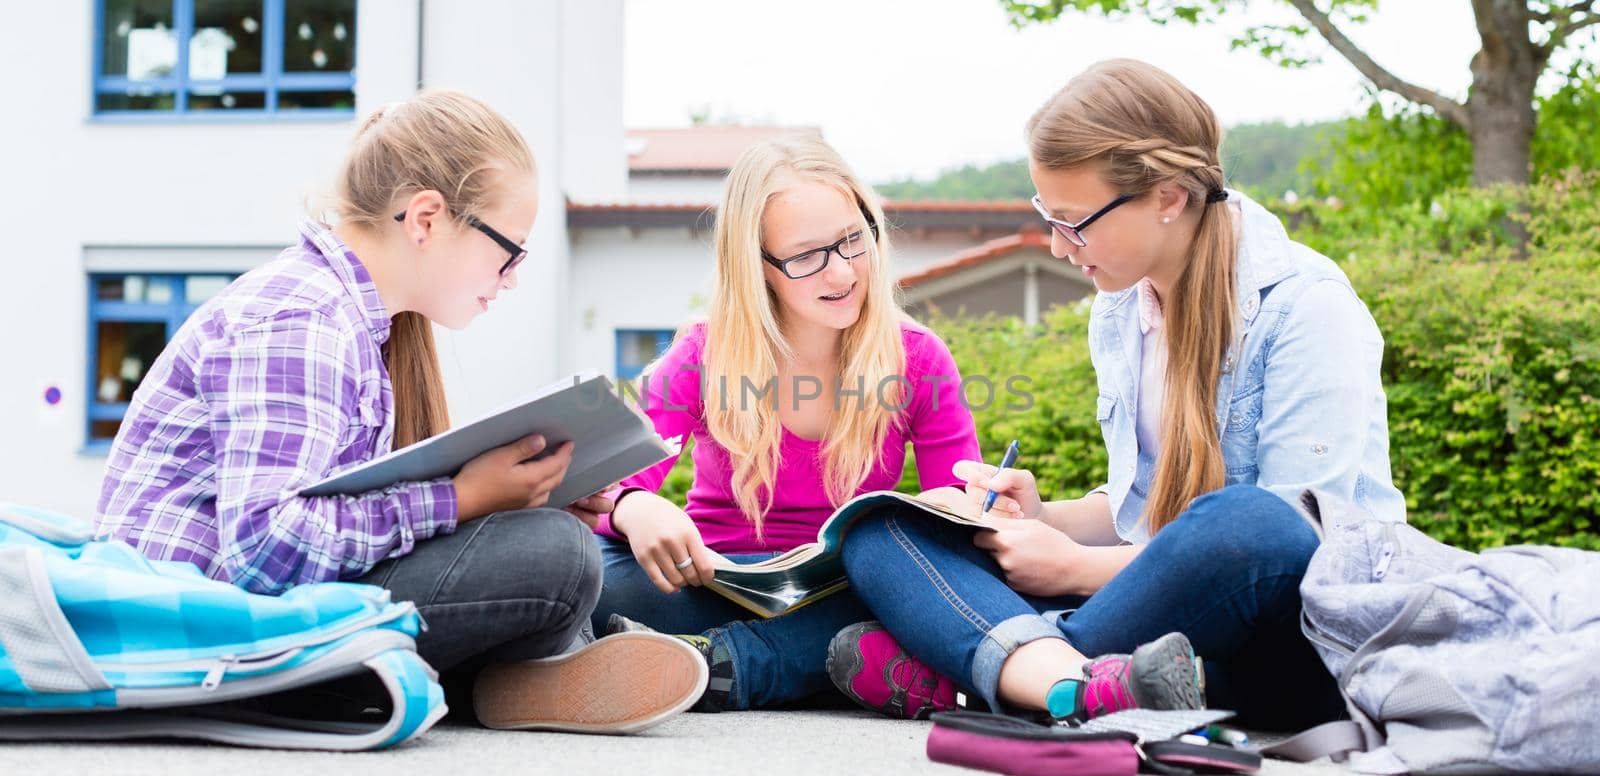 Students doing homework for school together by Kzenon